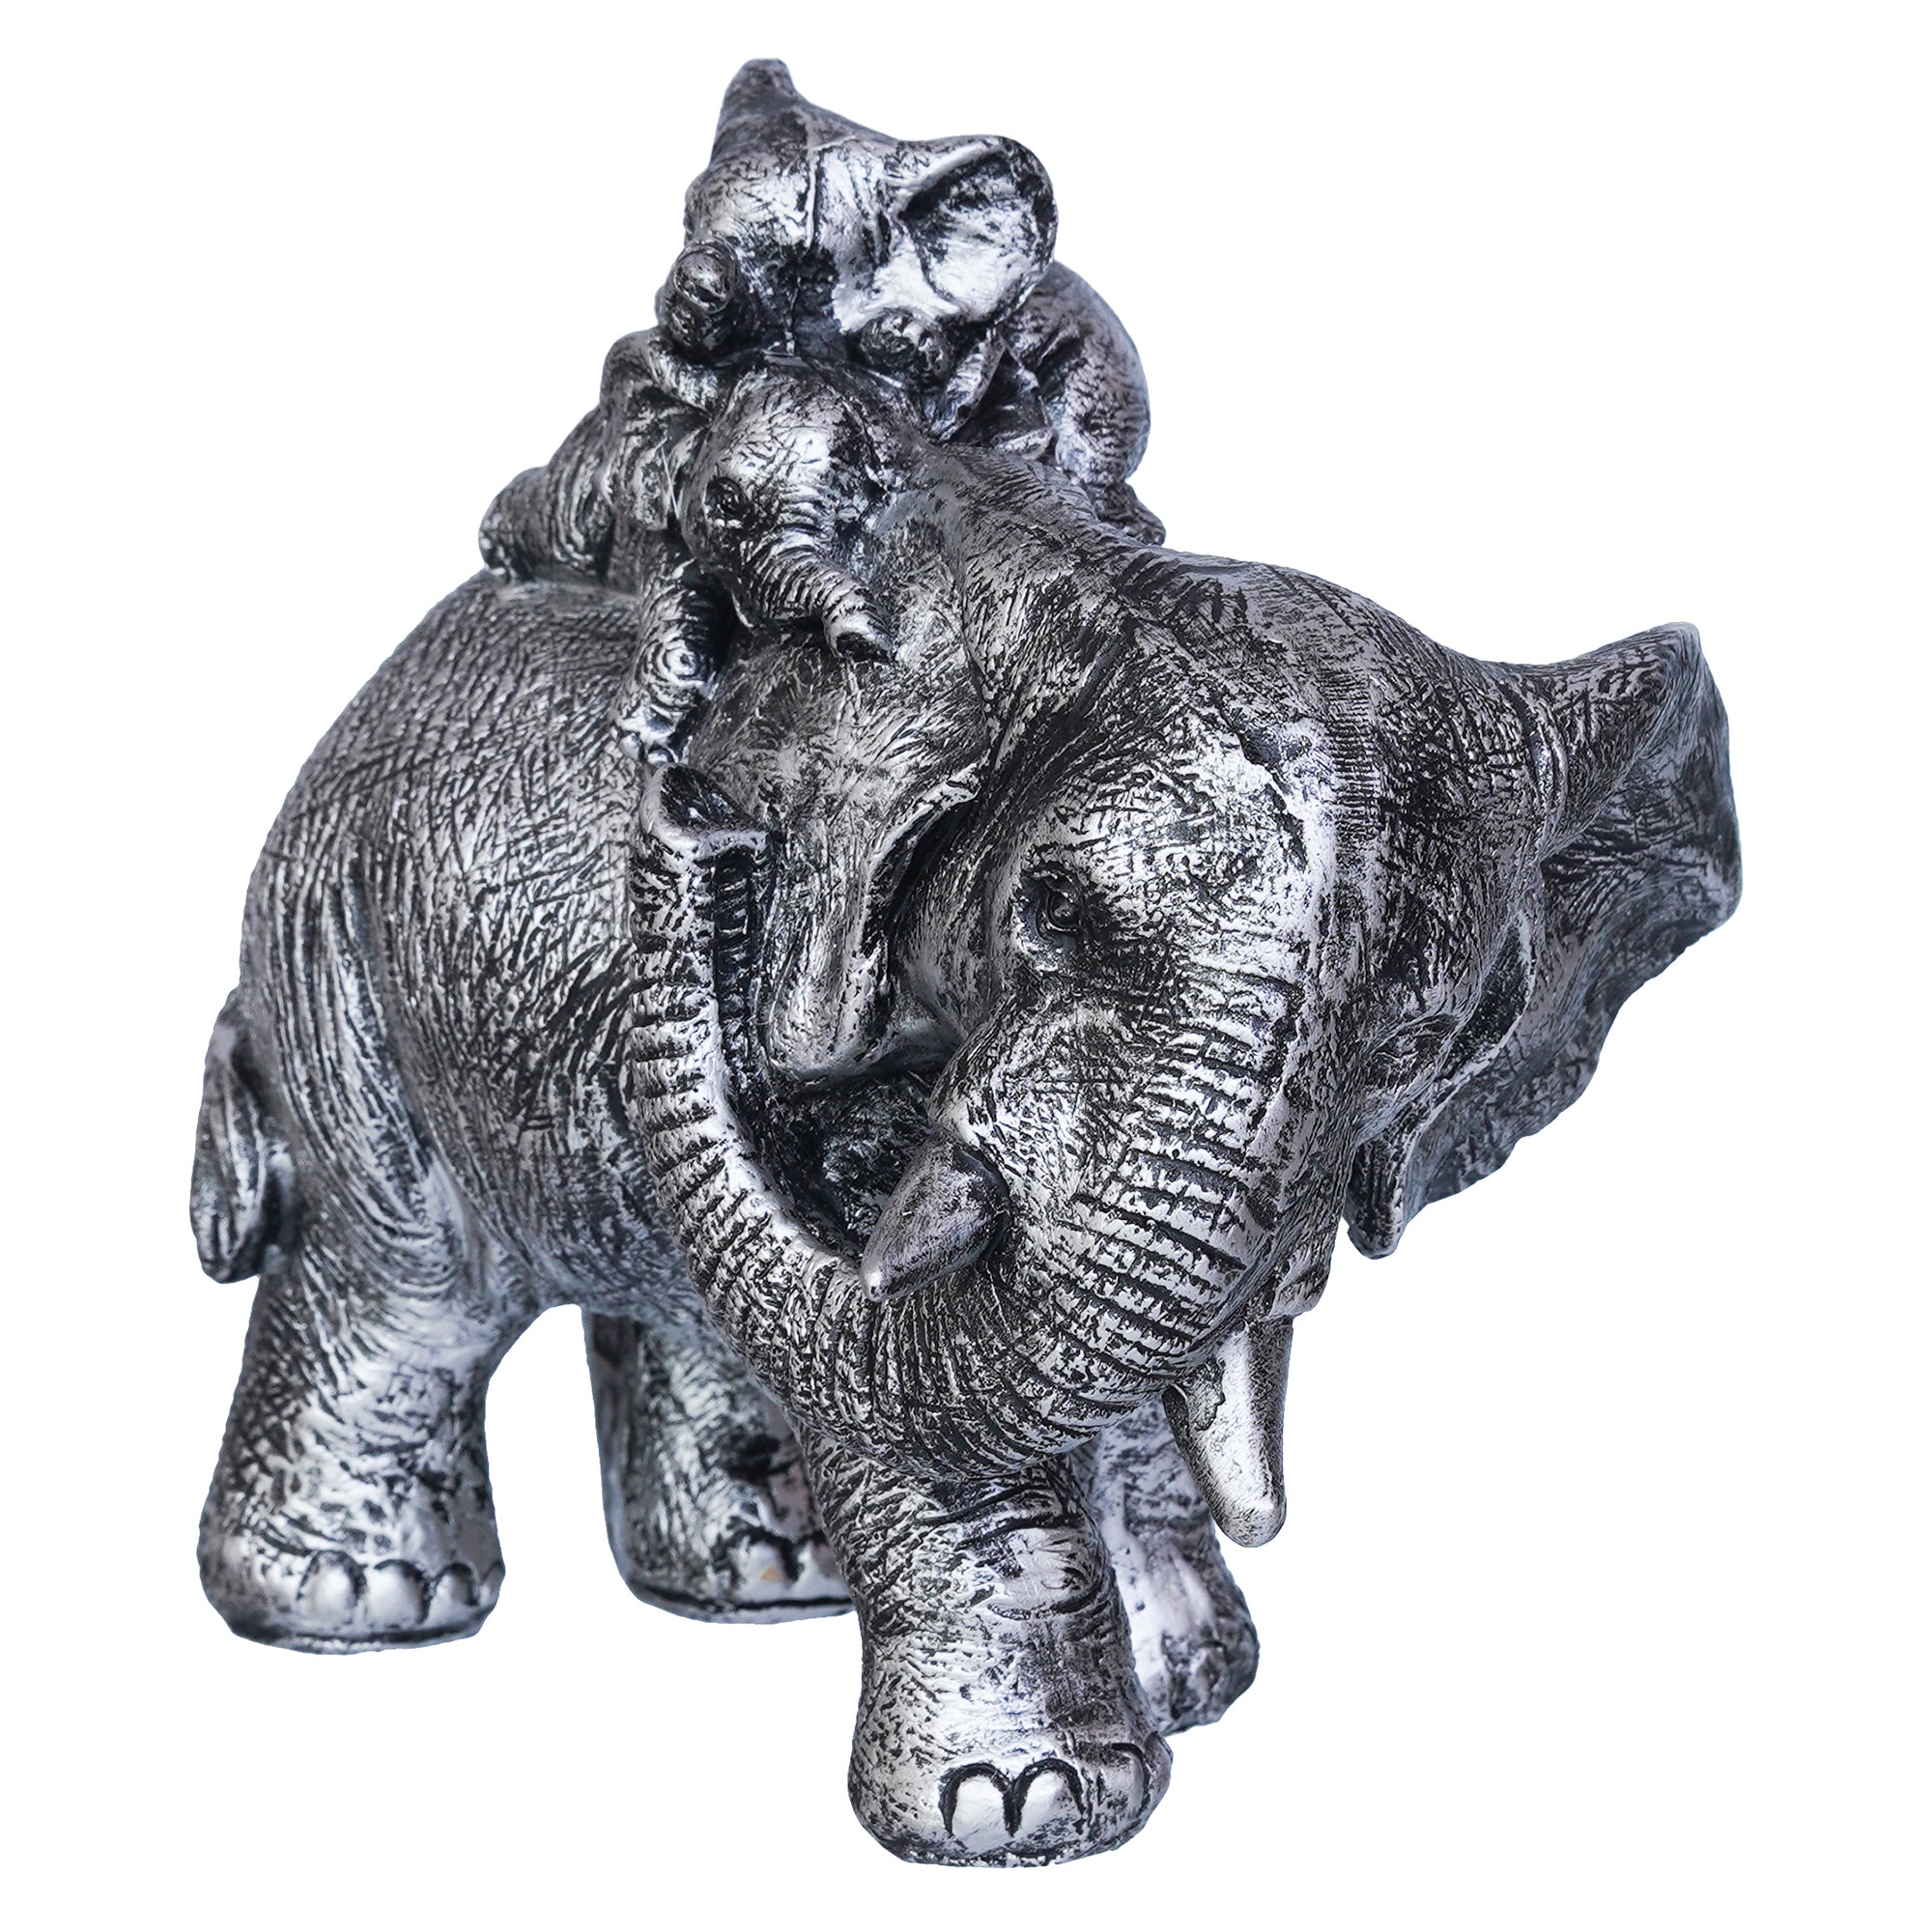 Polyresin Elephant Statue with Baby Elephant on his Back Decorative Showpiece 6